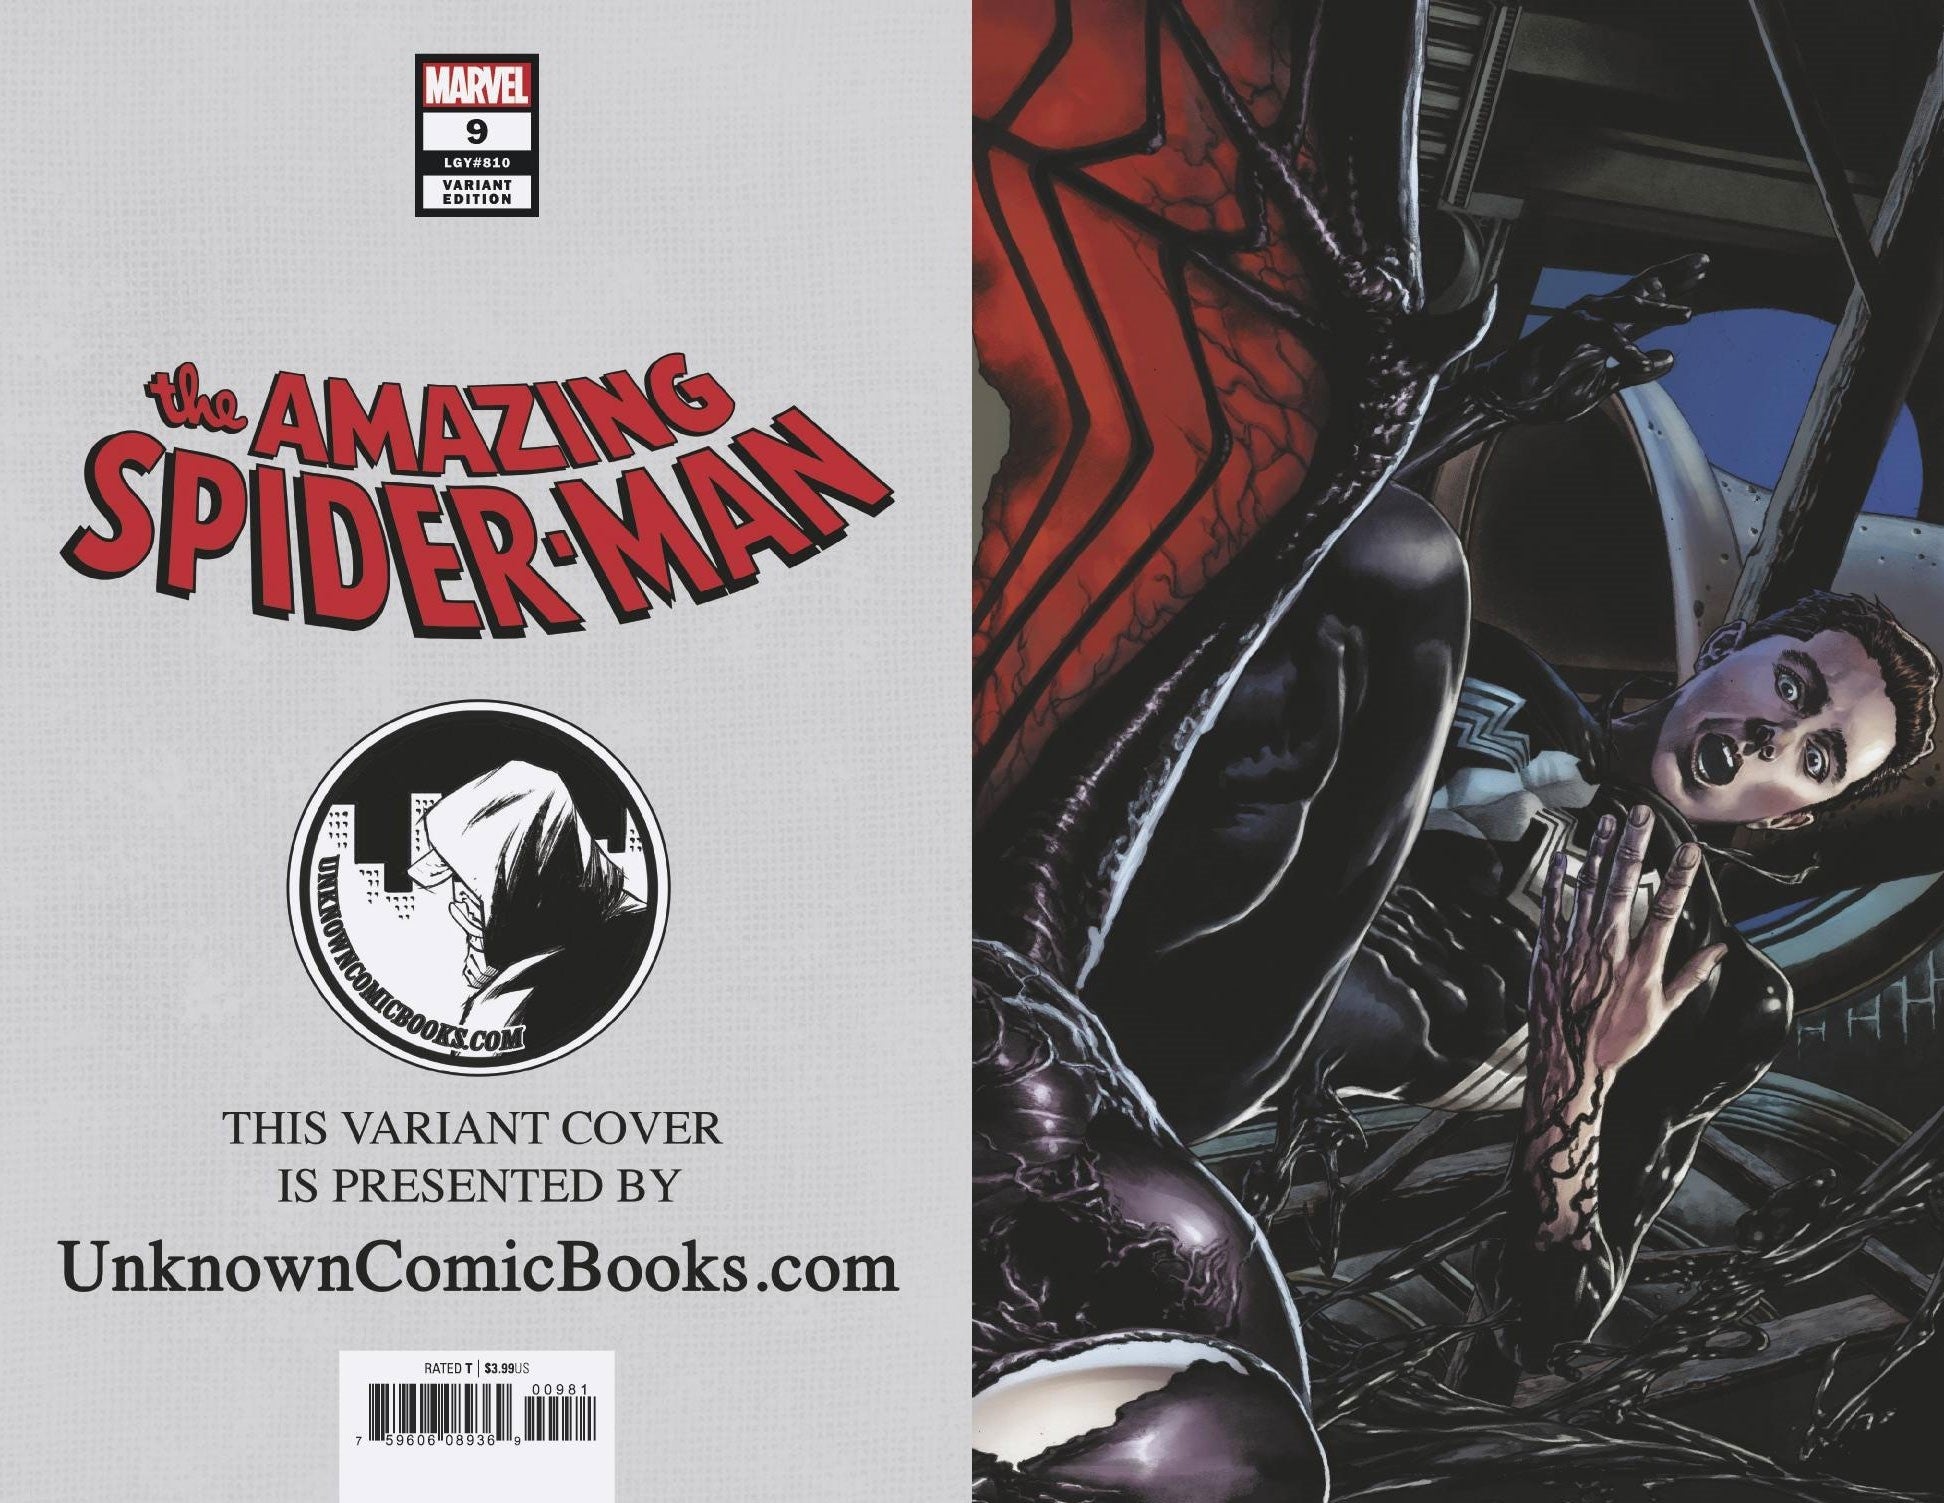 [4 PACK] AMAZING SPIDER-MAN VENOM CARNAGE 4 PART CONNECTING COVER SET UNKNOWN COMIC BOOKS SUAYAN VIRGIN EXCLUSIVE 11/28/2018